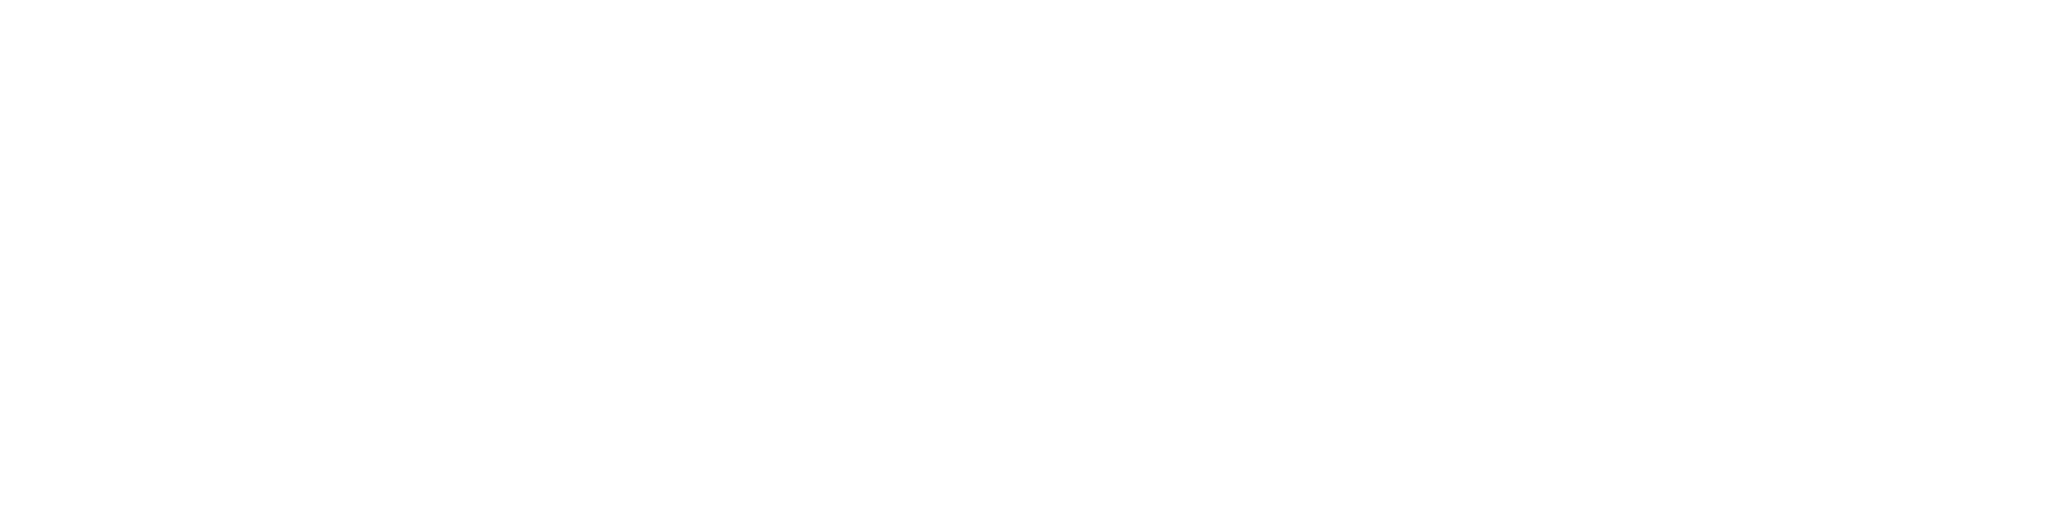 ActionCOACH logo_white